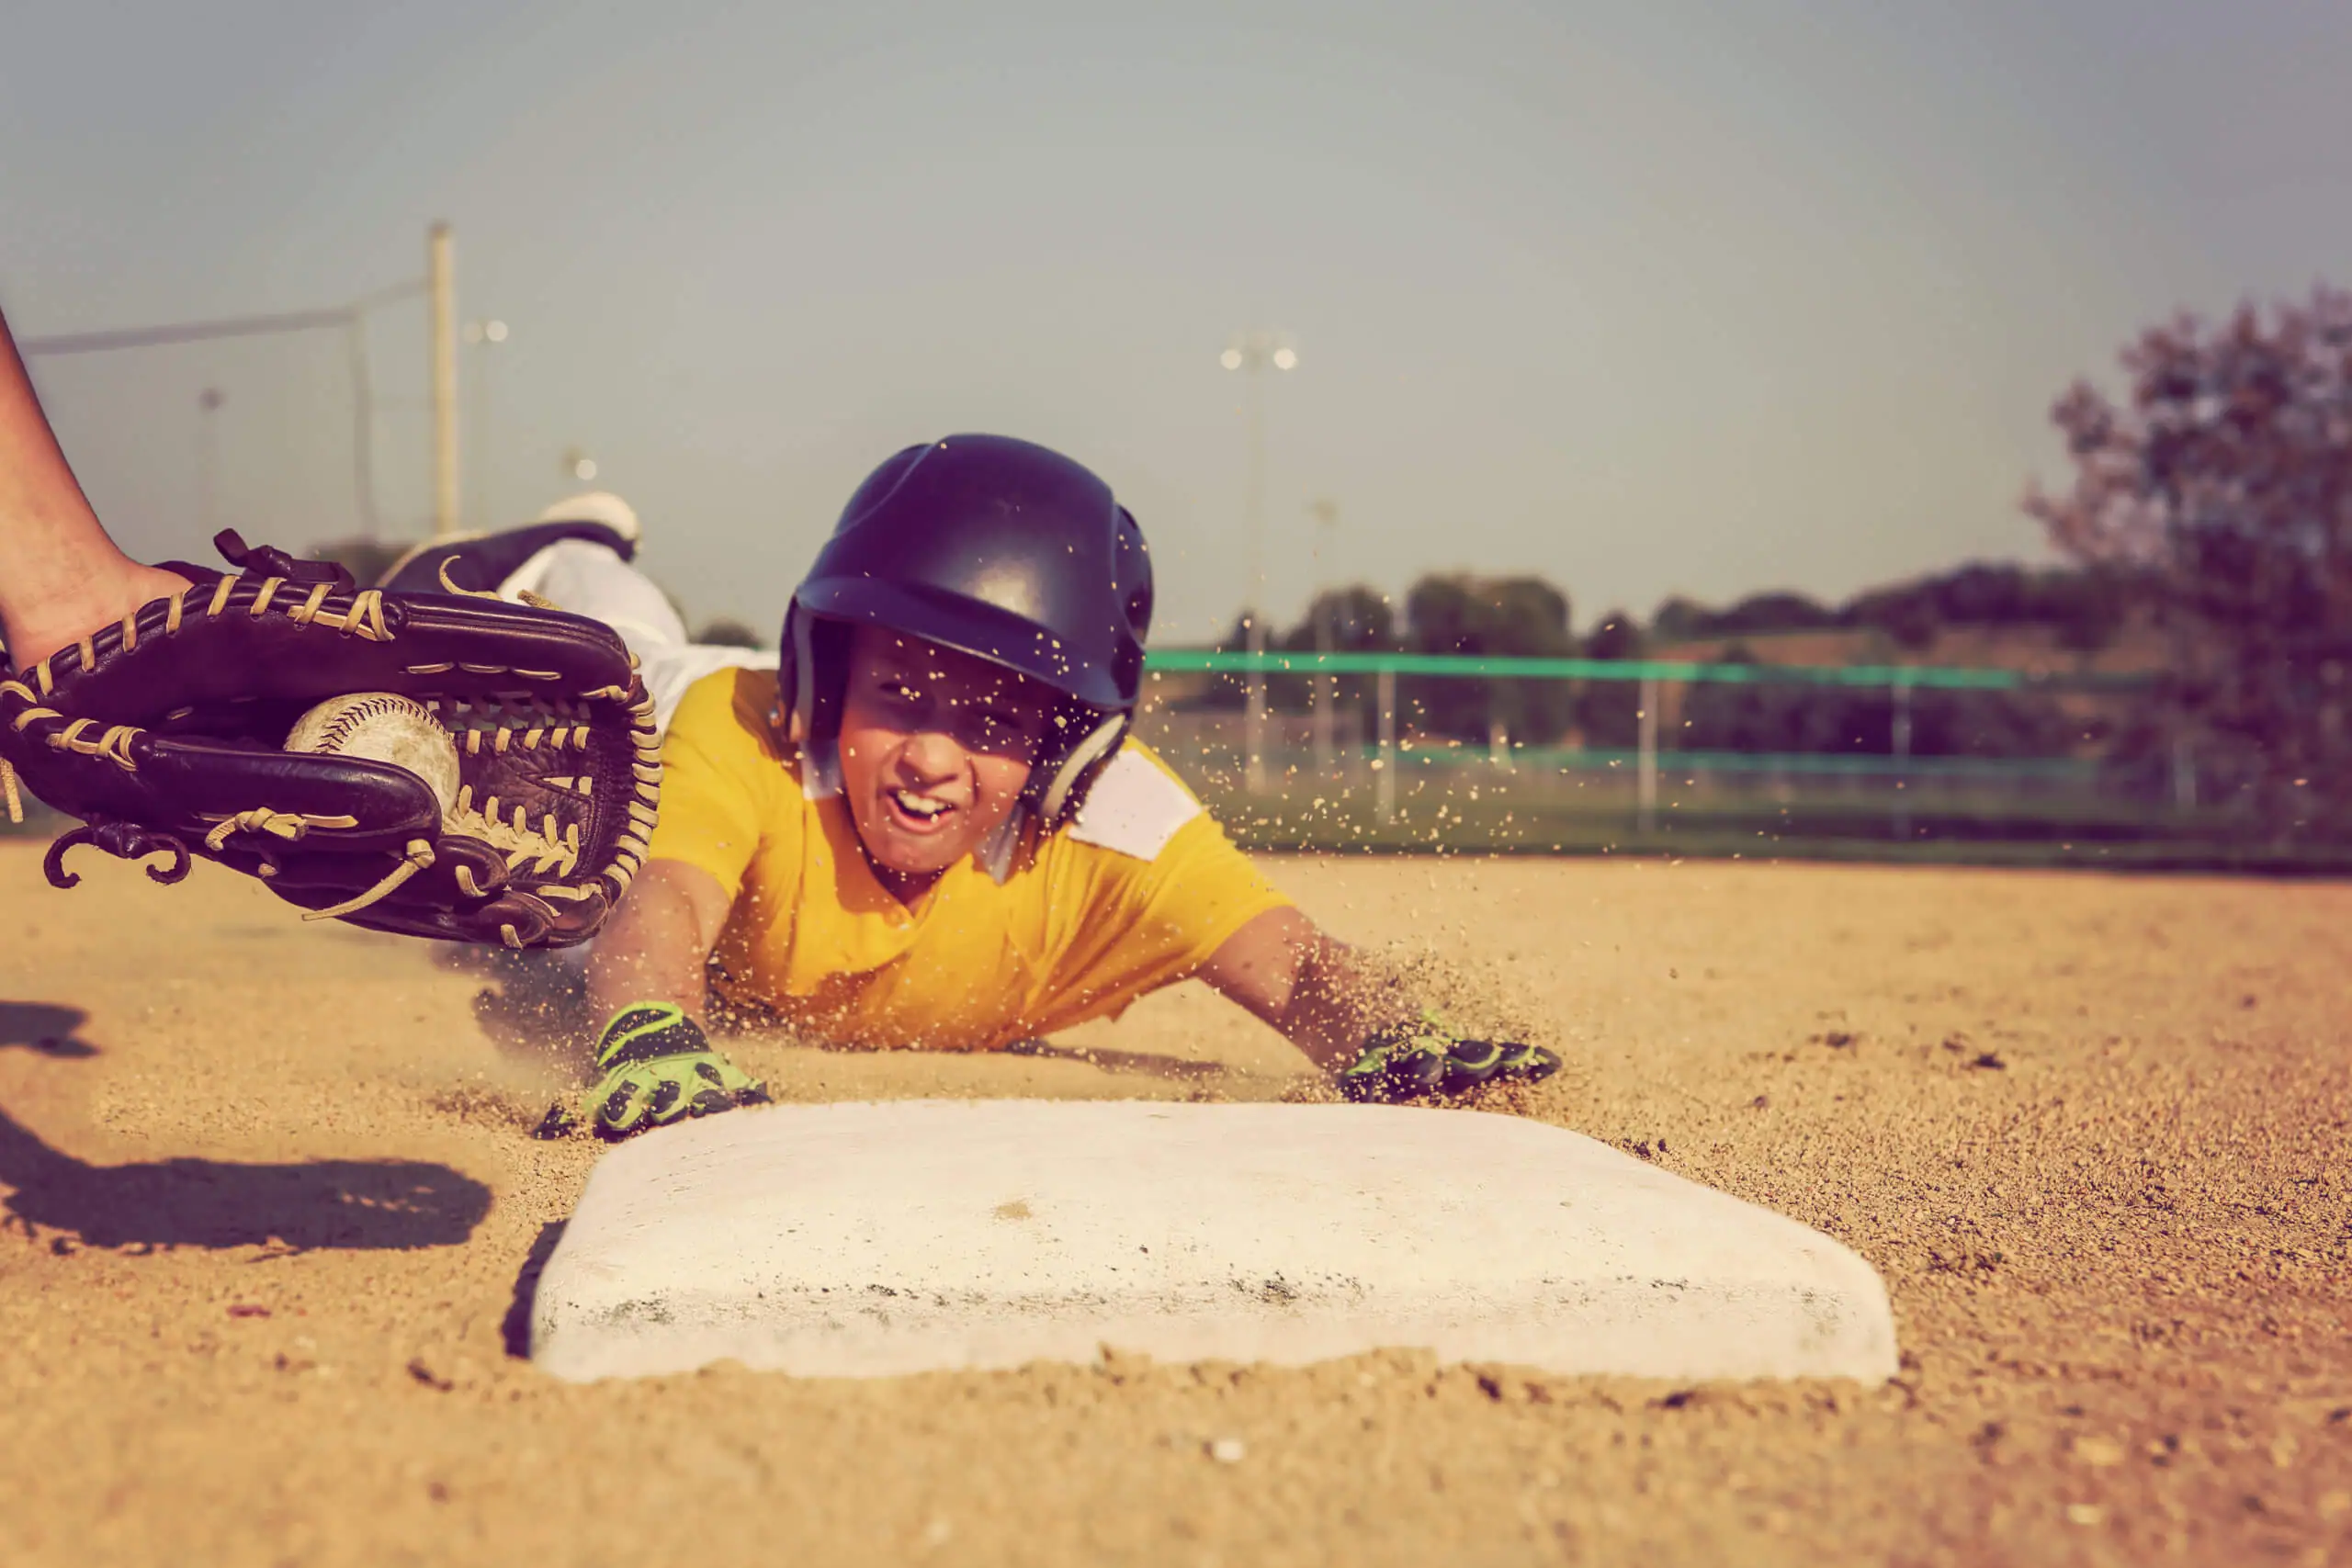 A boy slides into a base while another player reaches out to him with a ball and glove.